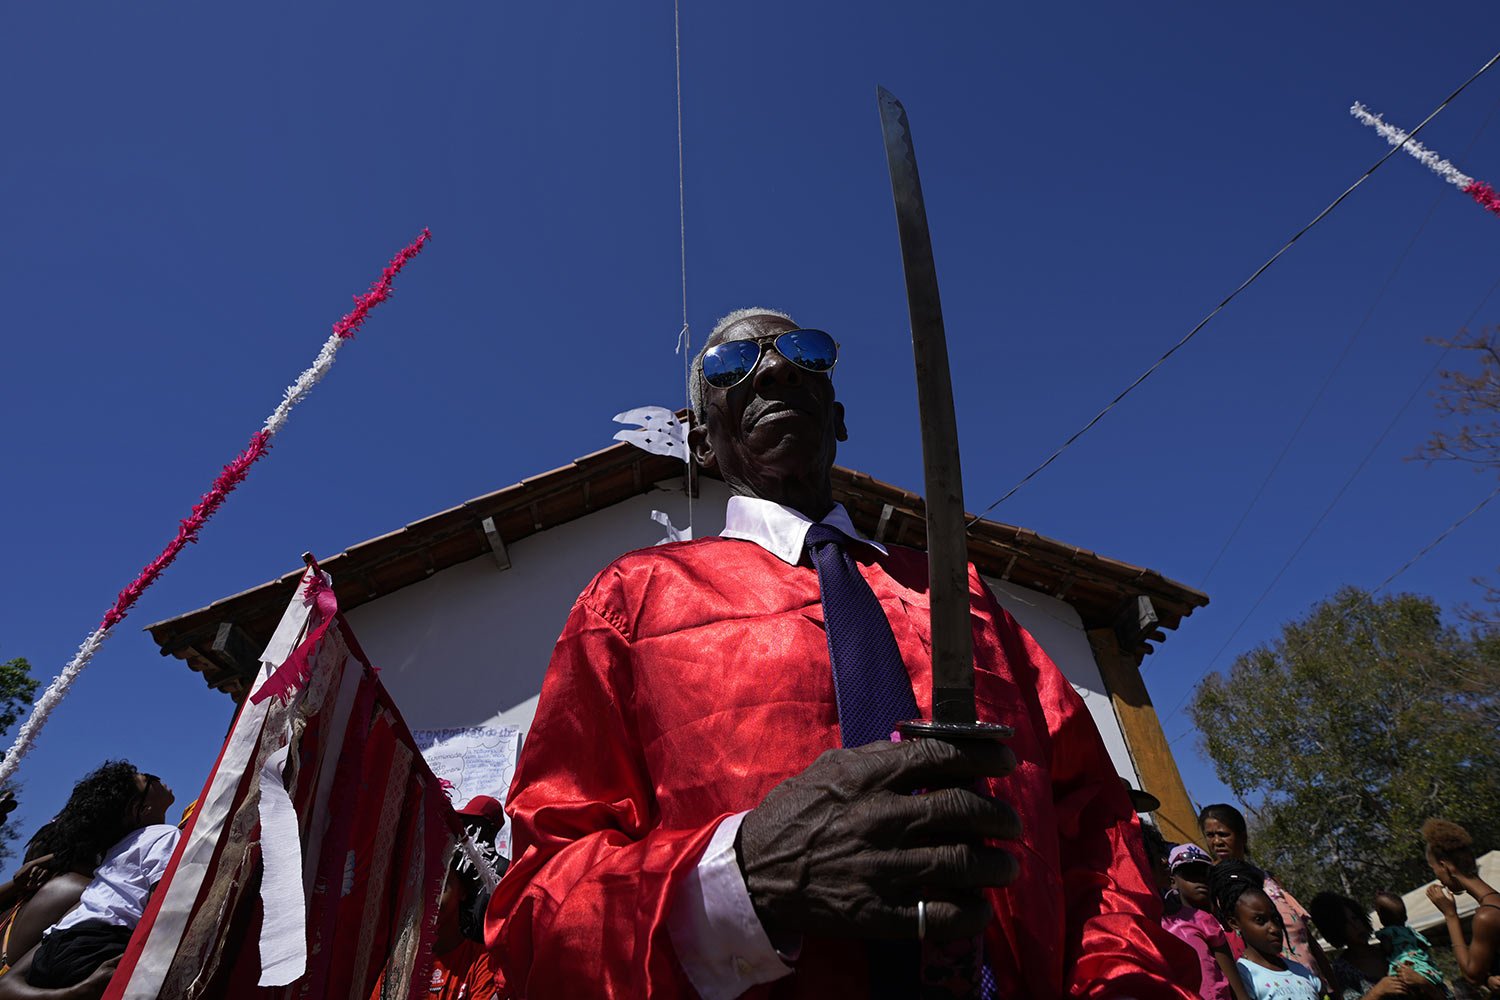  Neco Santana holds a ceremonial sword at the end of a week-long pilgrimage honoring the patron saint in Cavalcante, Goias state, Brazil, Aug. 14, 2022. (AP Photo/Eraldo Peres) 